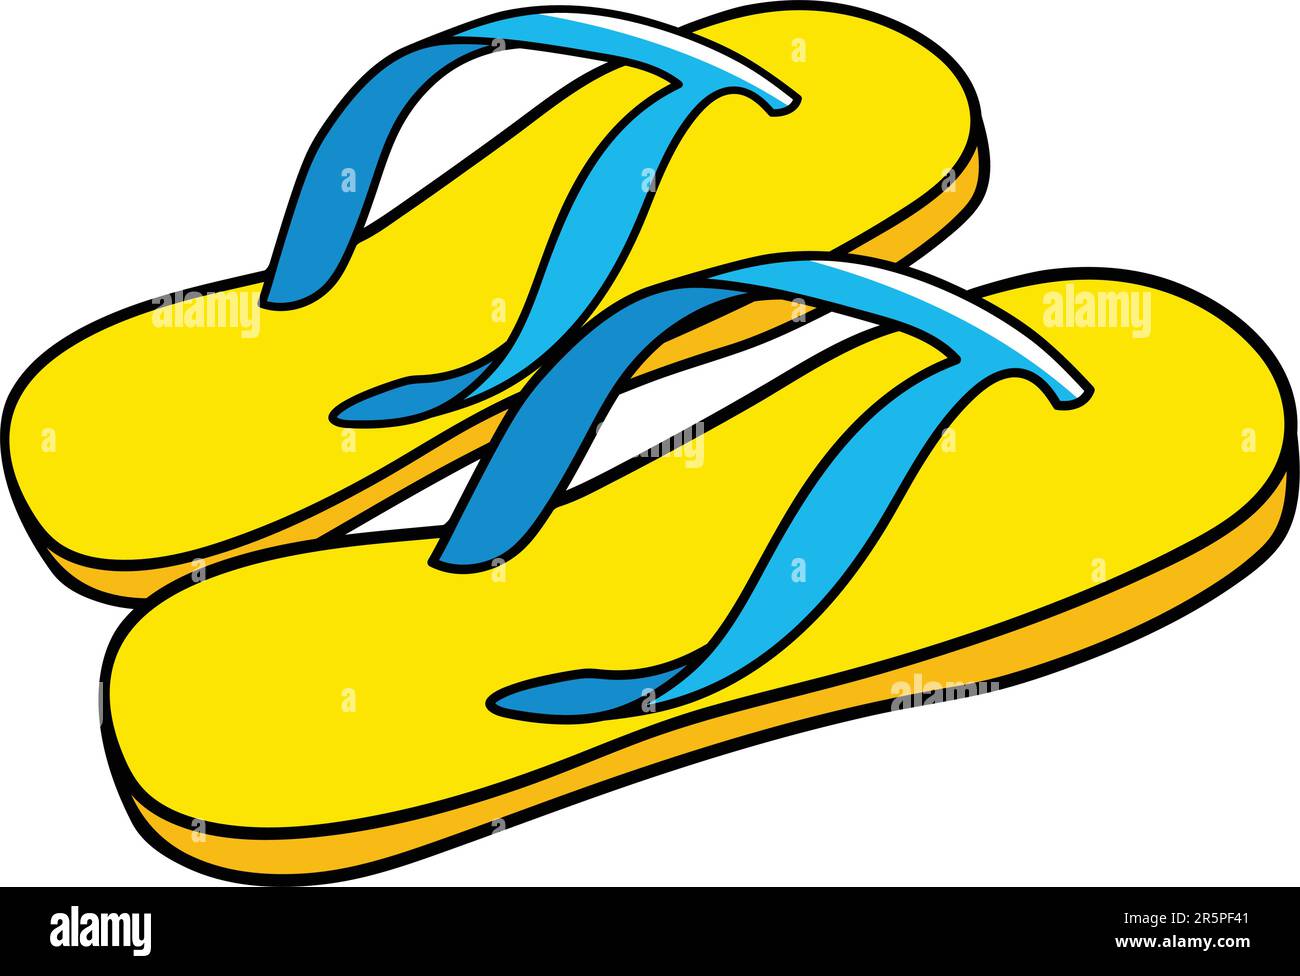 Yellow sandal Cut Out Stock Images & Pictures - Page 3 - Alamy